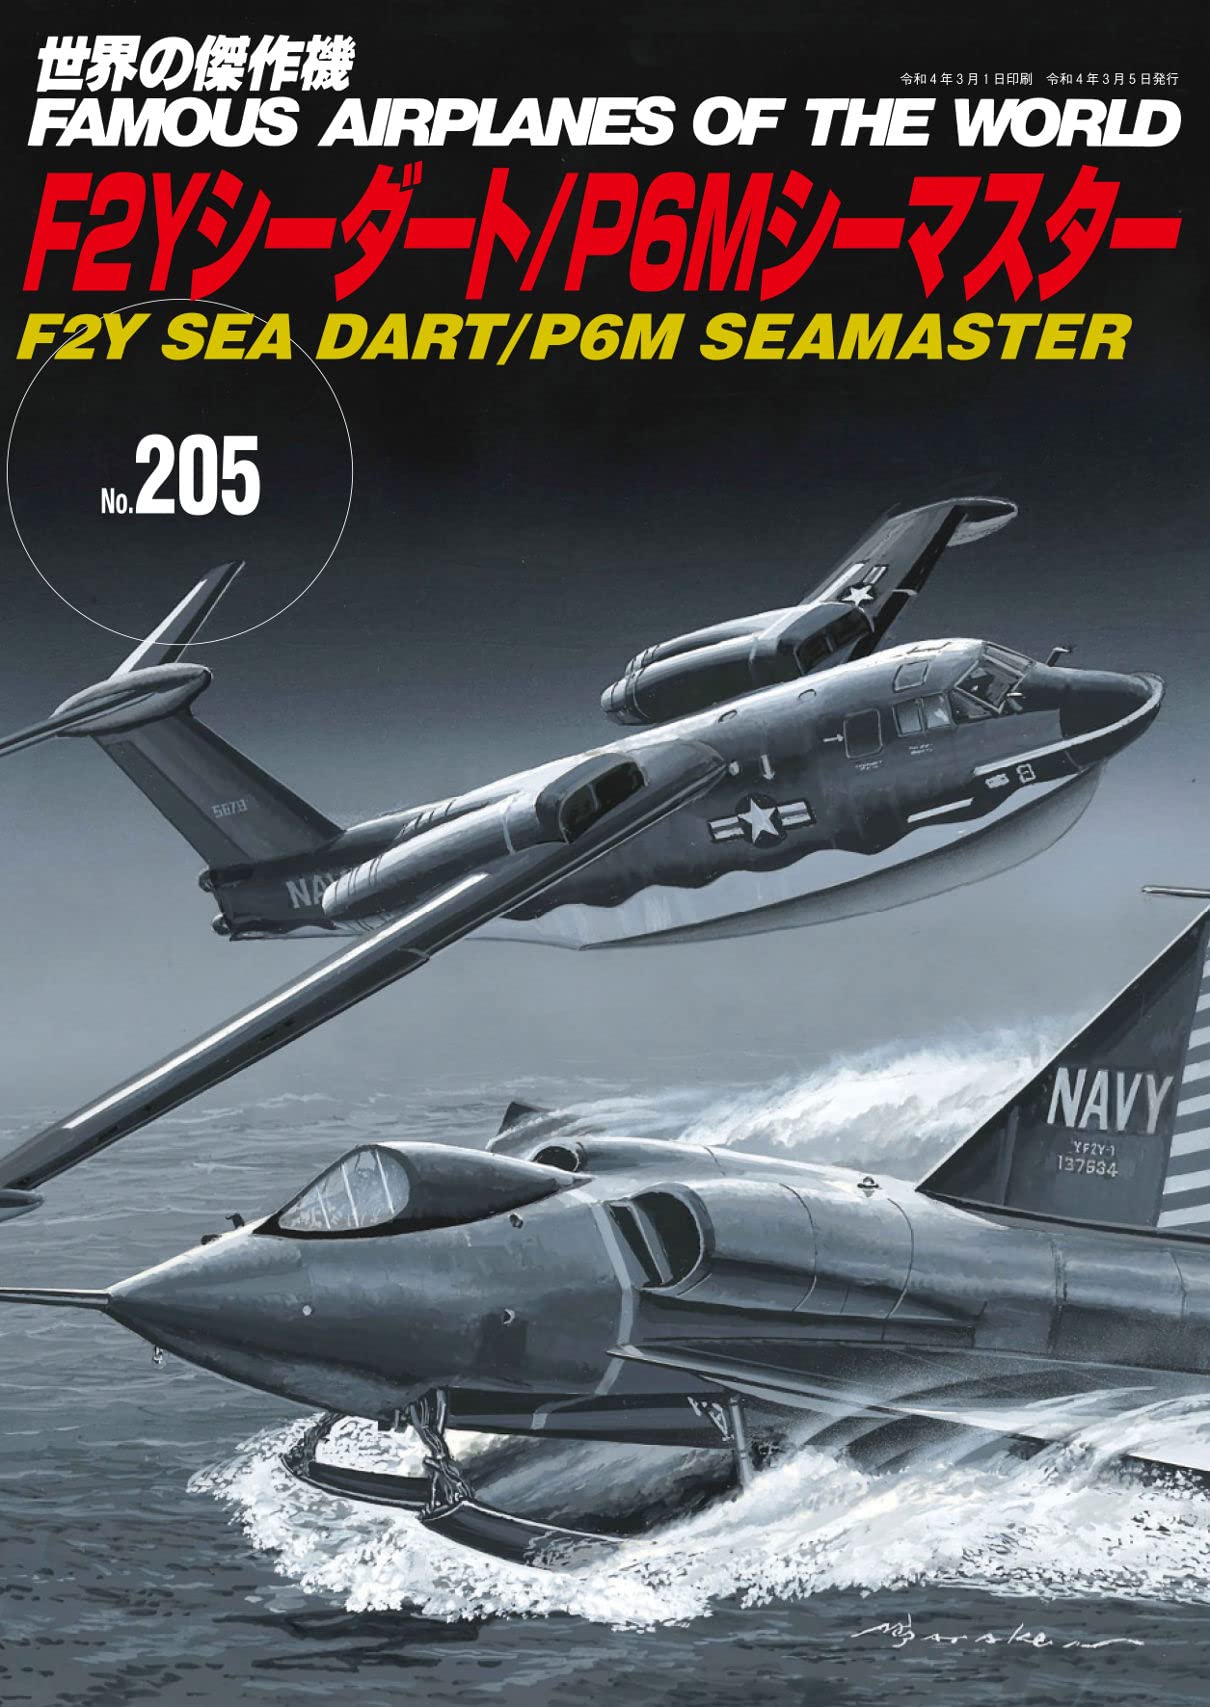 F2Y SEA DART/P6M SEAMASTER / Famous Airplanes of The World No.205